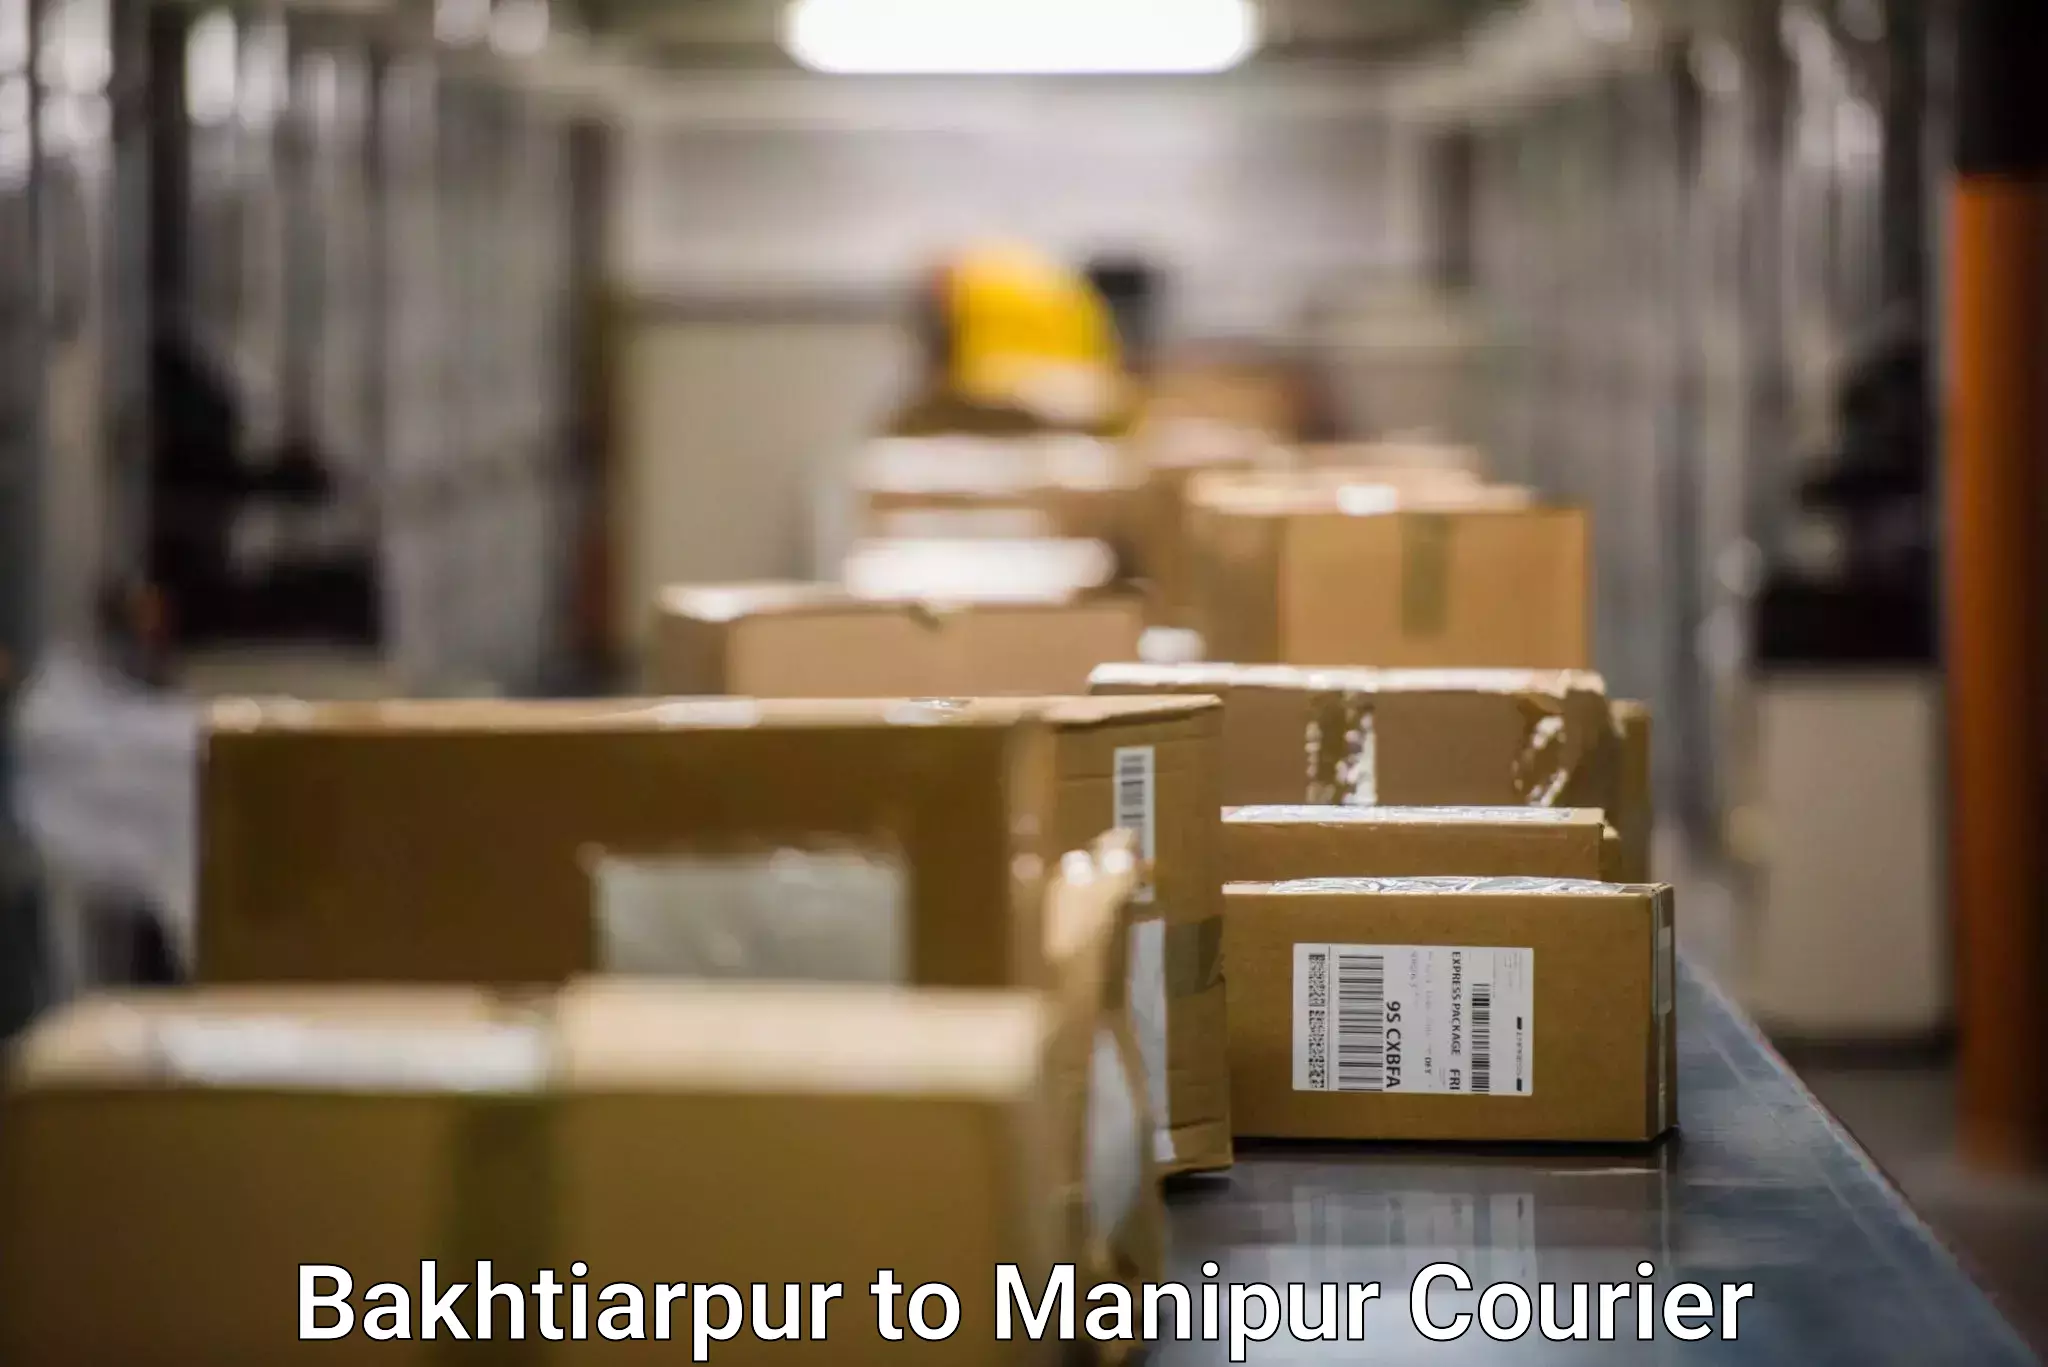 Cargo delivery service Bakhtiarpur to Imphal